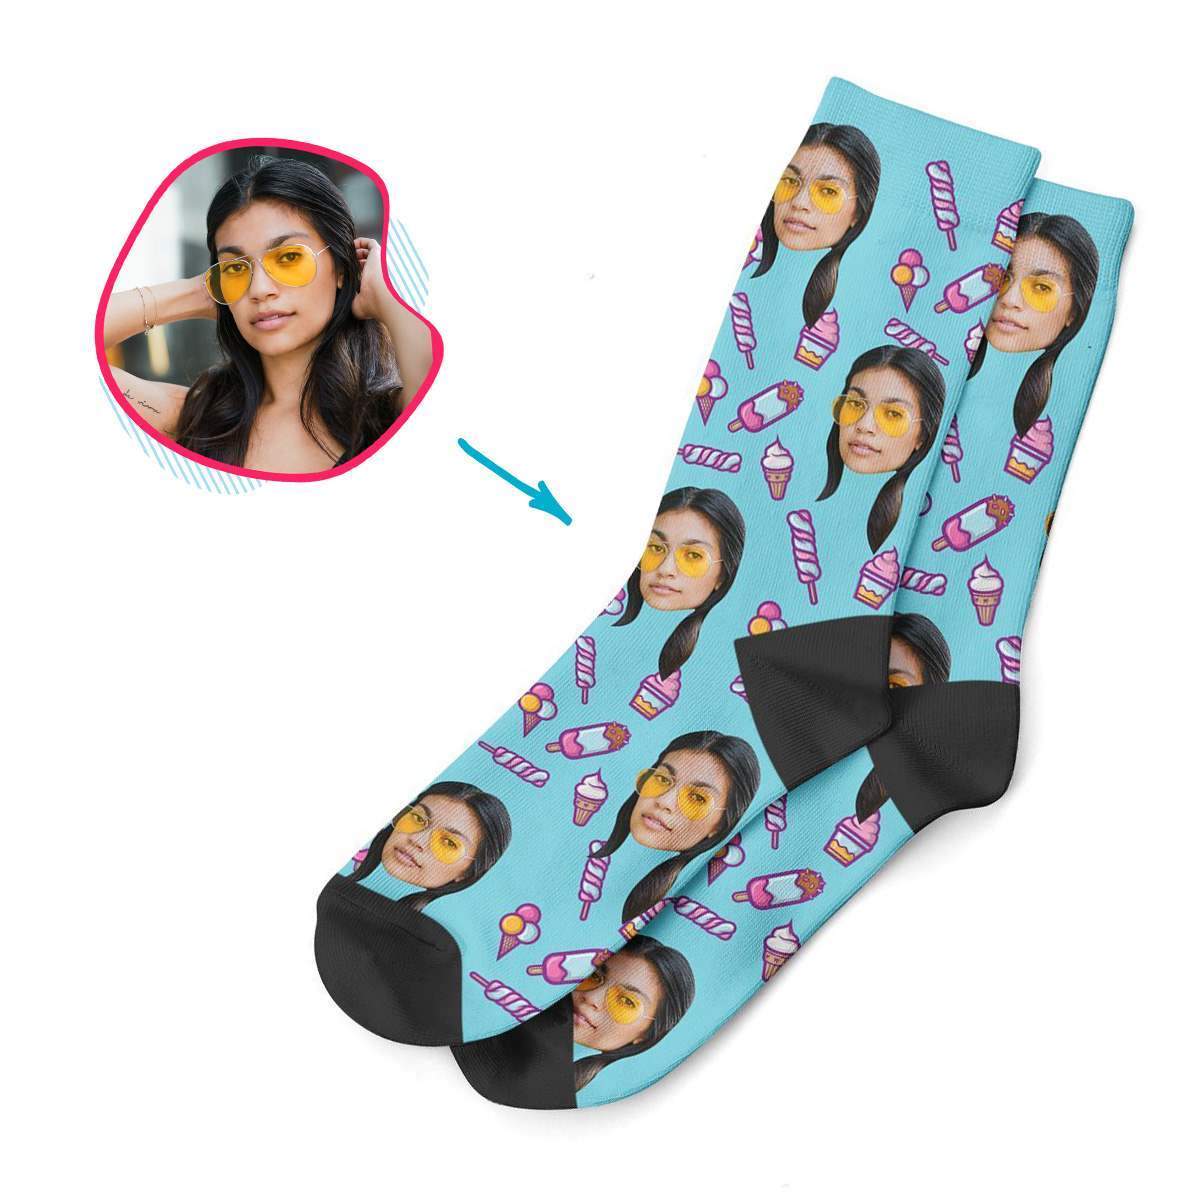 blue Candies socks personalized with photo of face printed on them